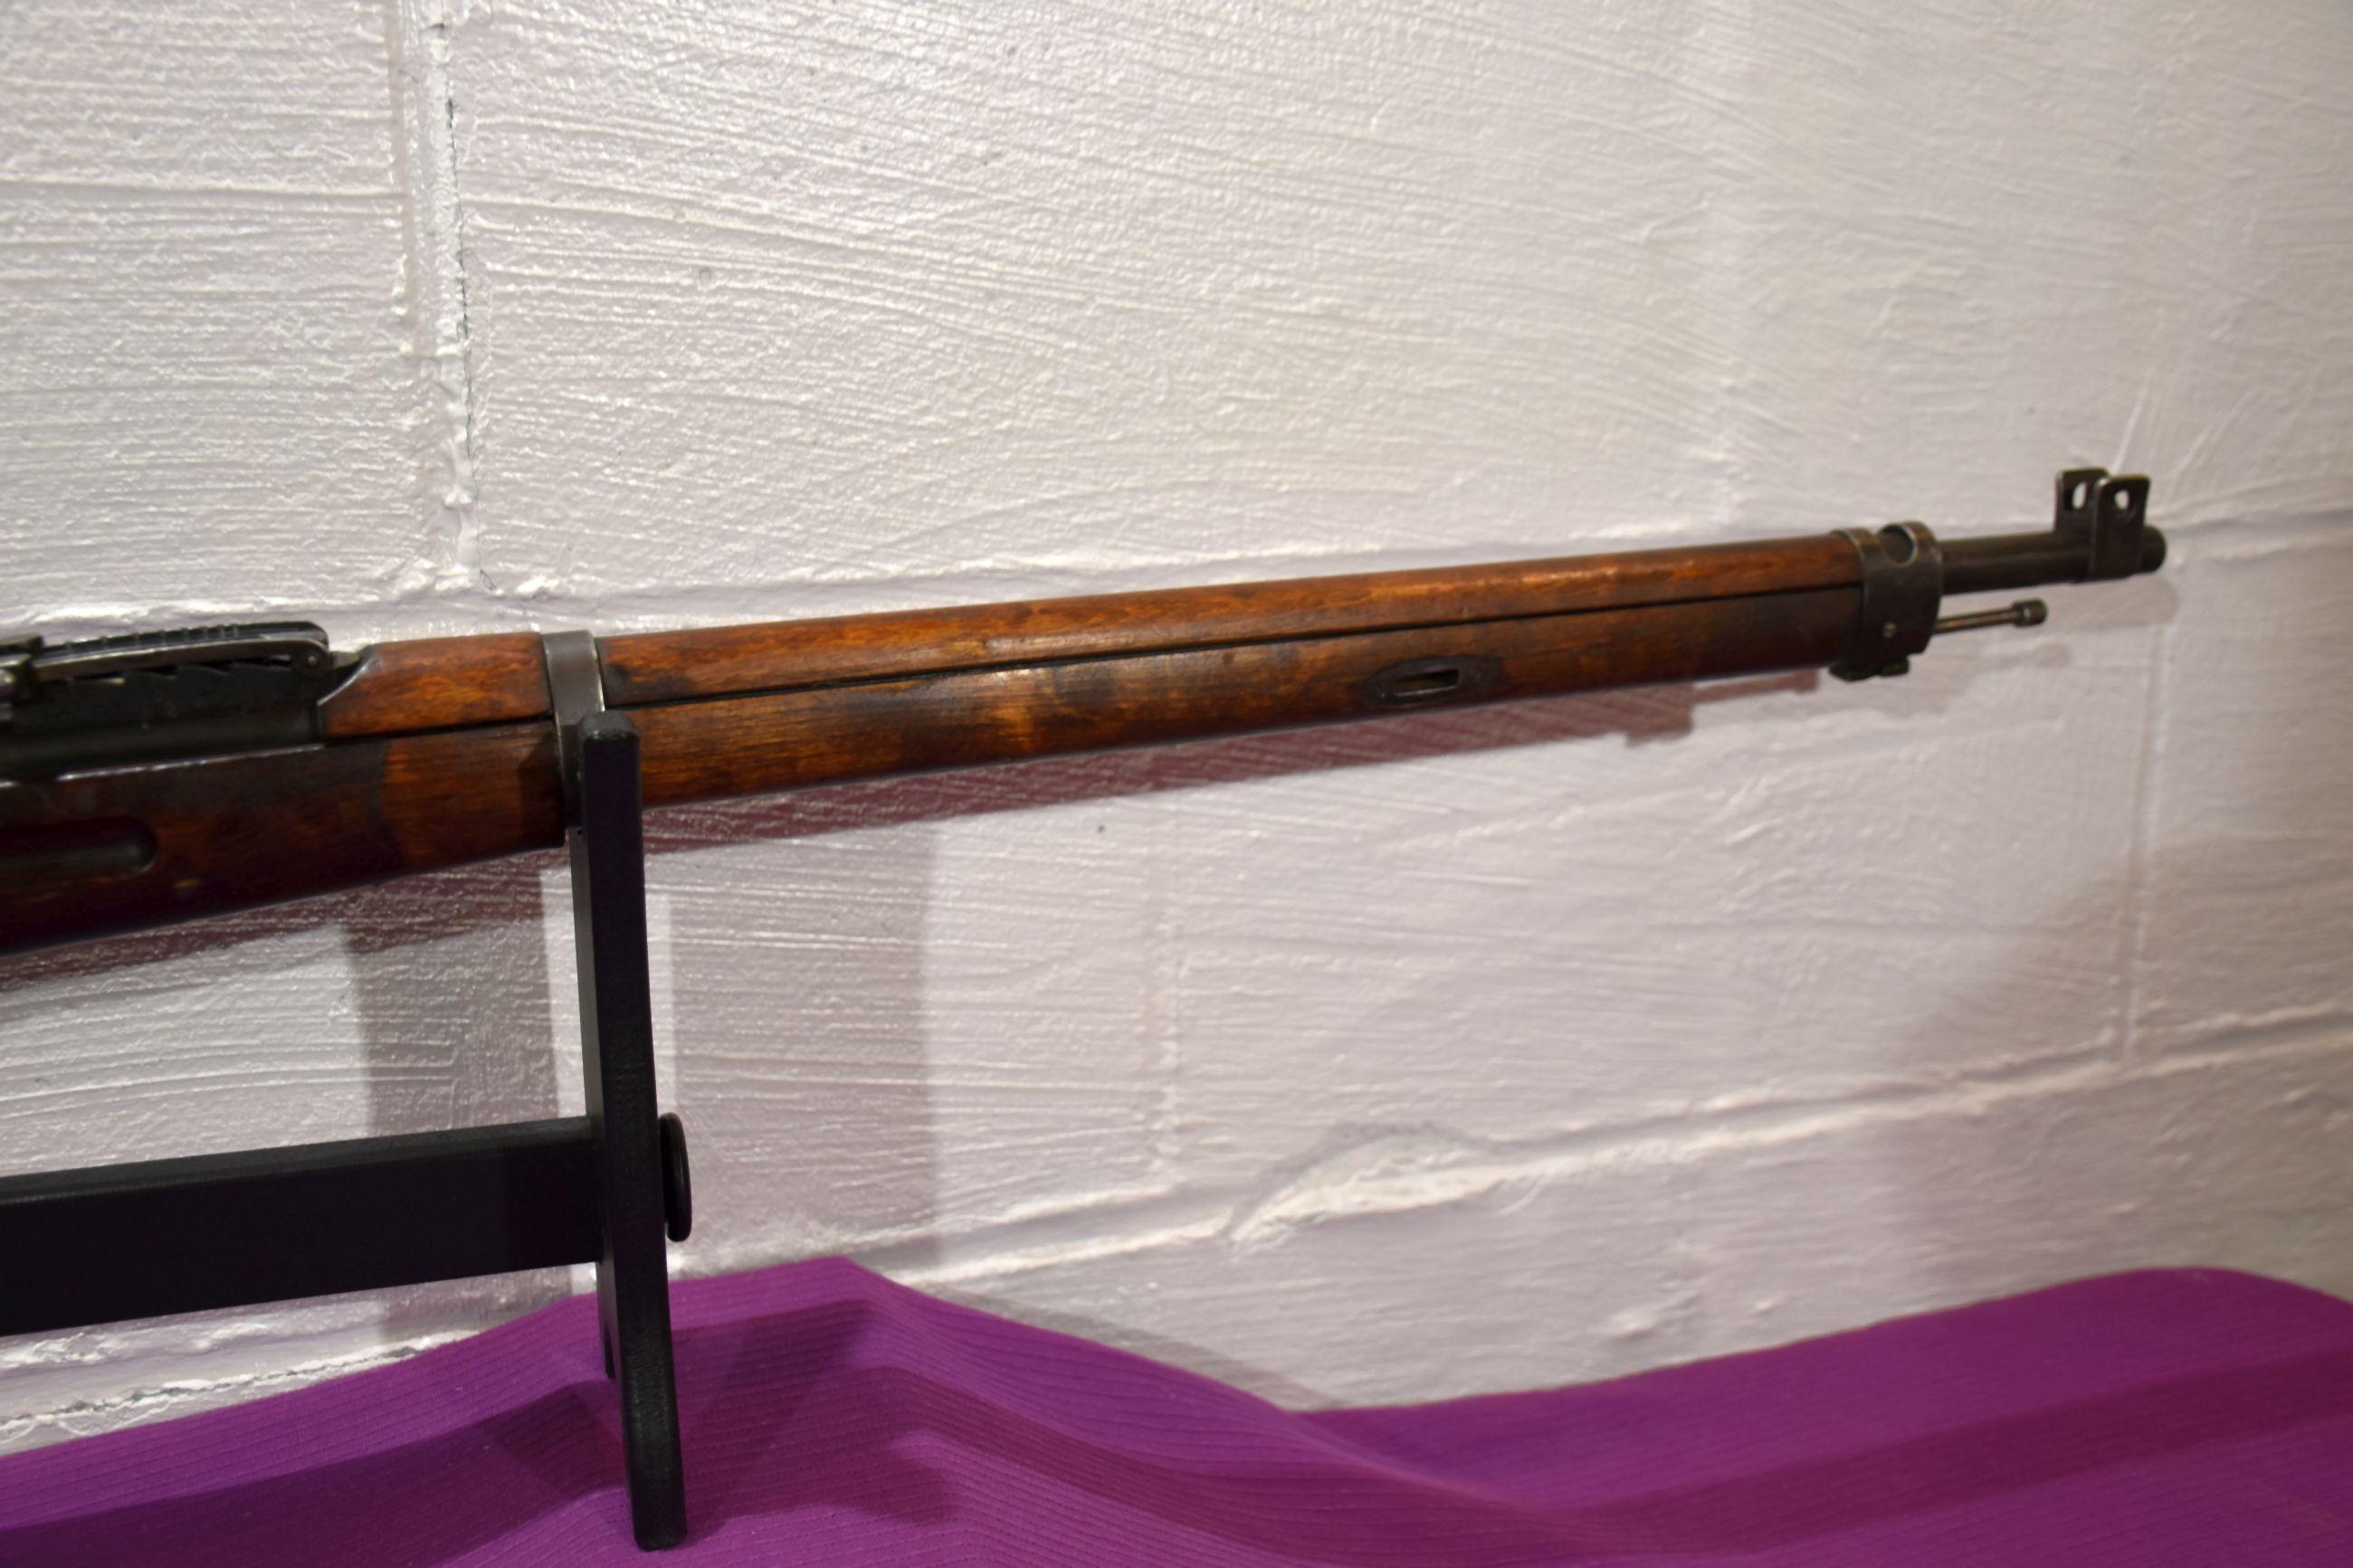 Japanese Bolt Action Military Rifle, SN: 12572, Stamped SA